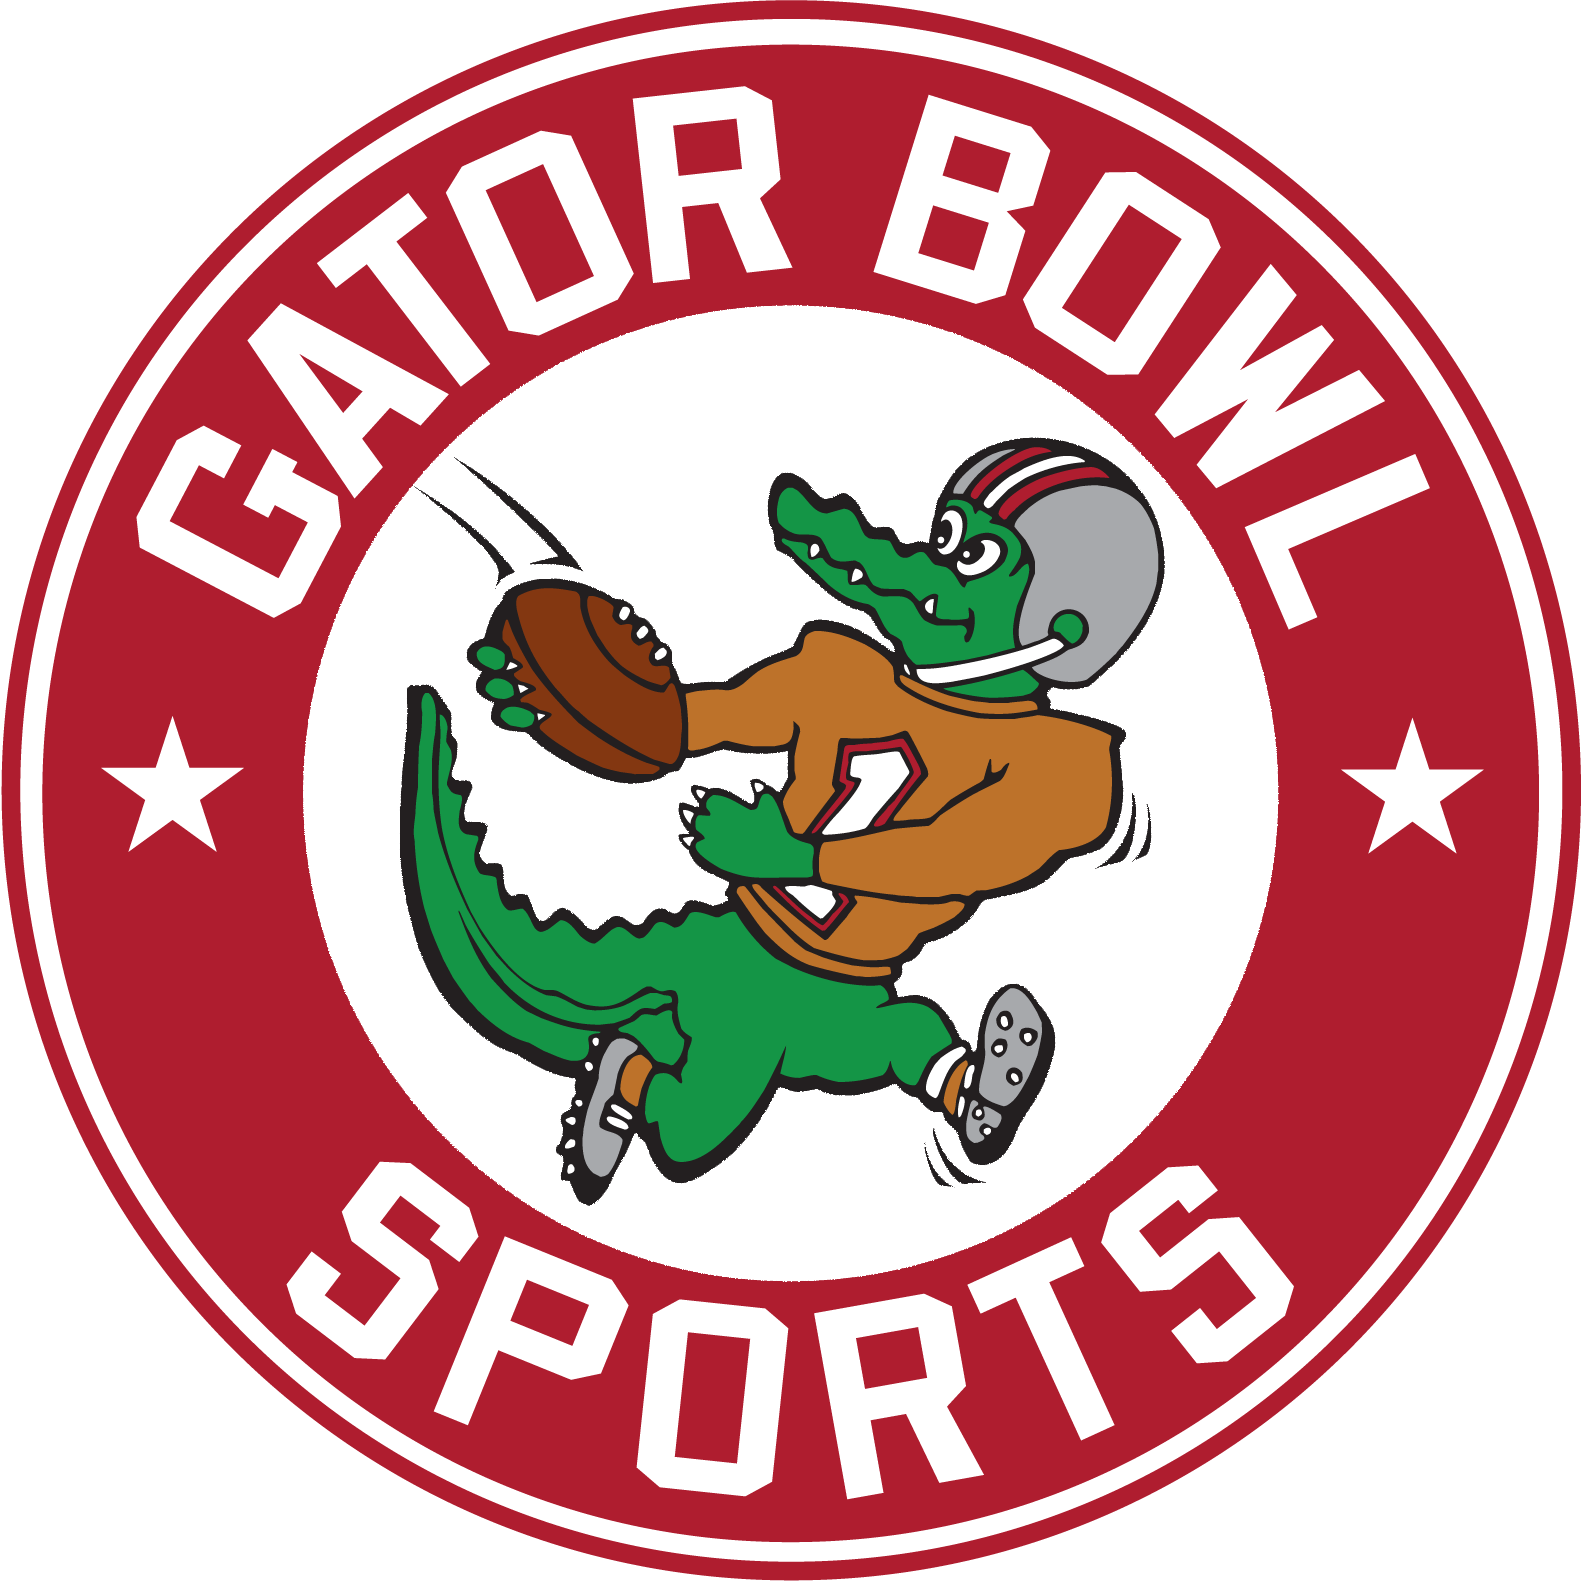 GREG MCGARITY NAMED GATOR BOWL SPORTS PRESIDENT AND CEO  TaxSlayer